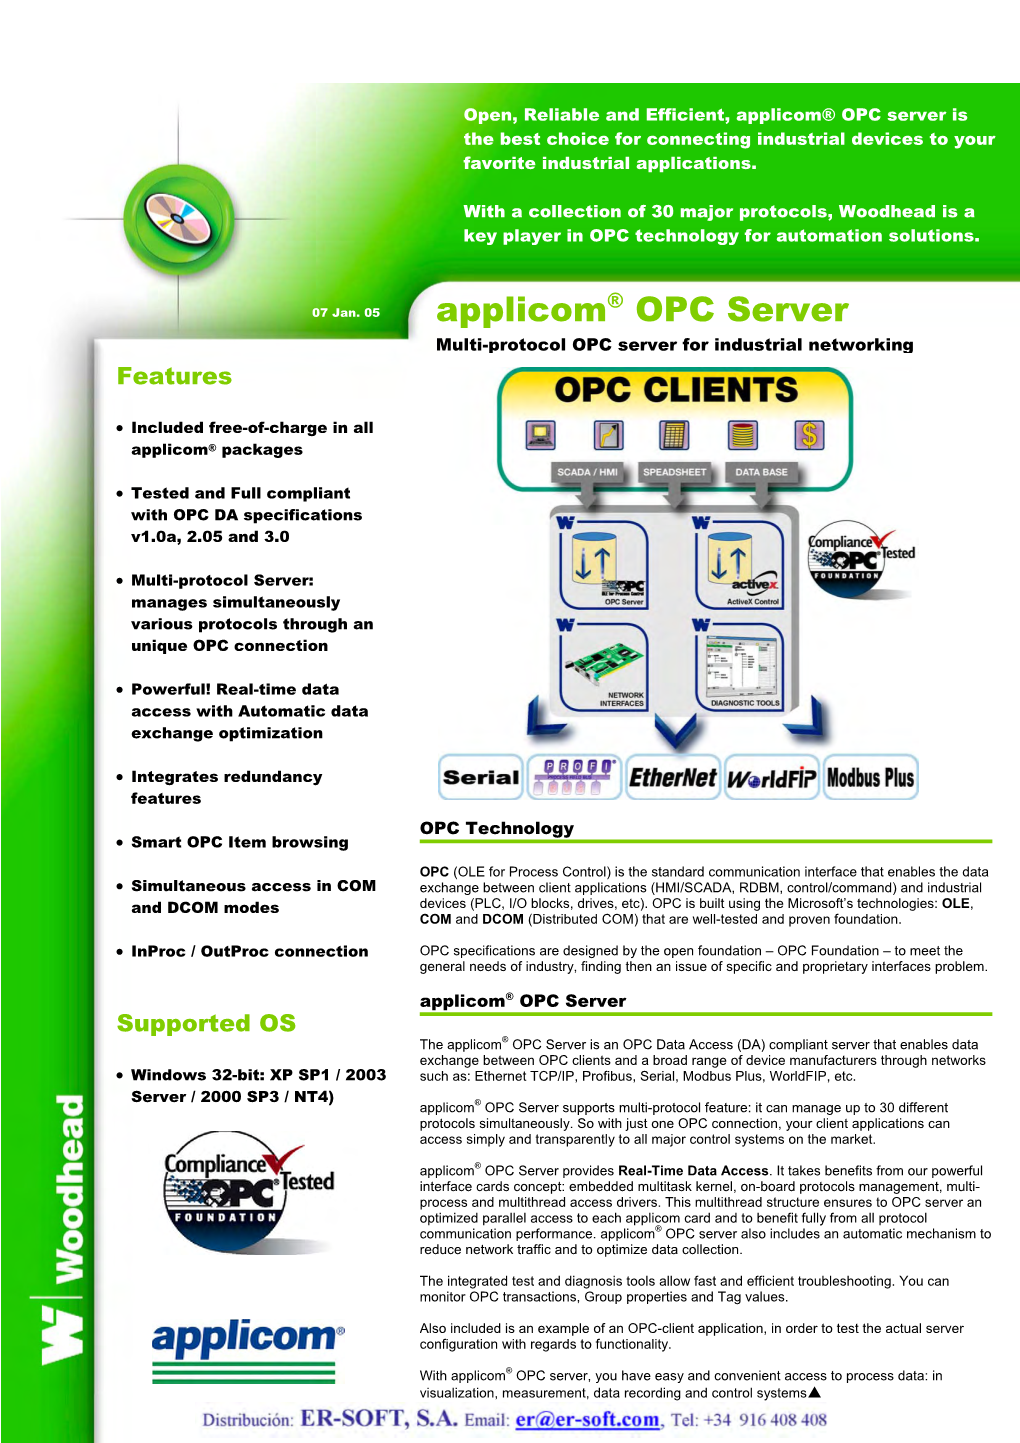 Applicom® OPC Server Is the Best Choice for Connecting Industrial Devices to Your Favorite Industrial Applications